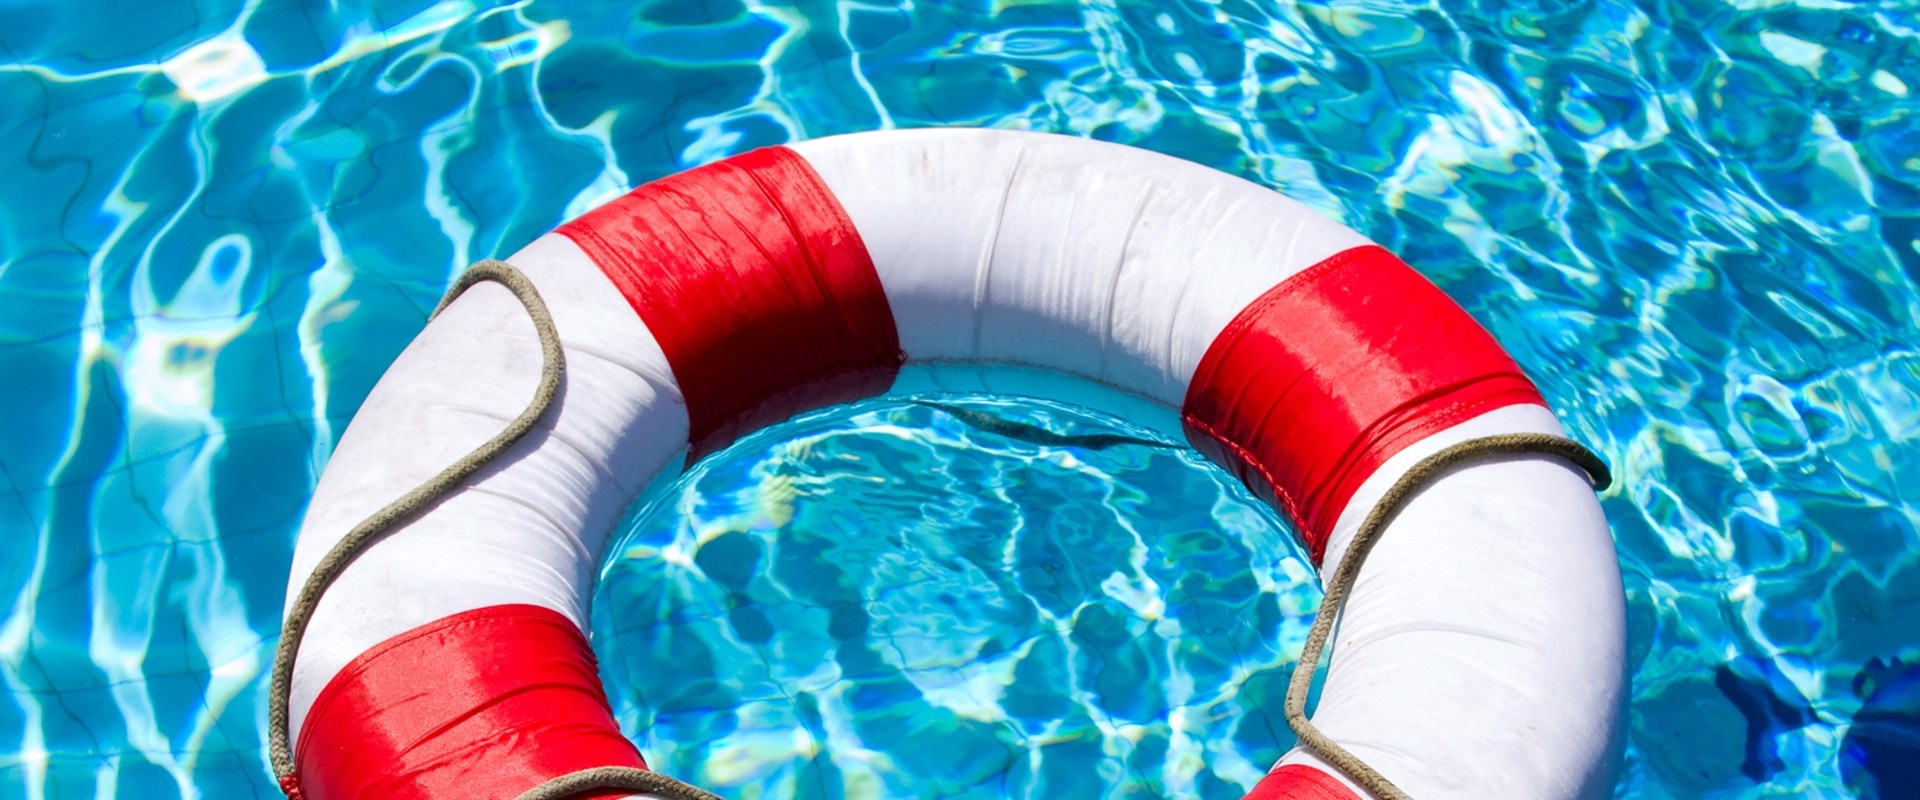 Swimming Pool Safety: Everything You Need to Know About Life Rings and Life Preservers